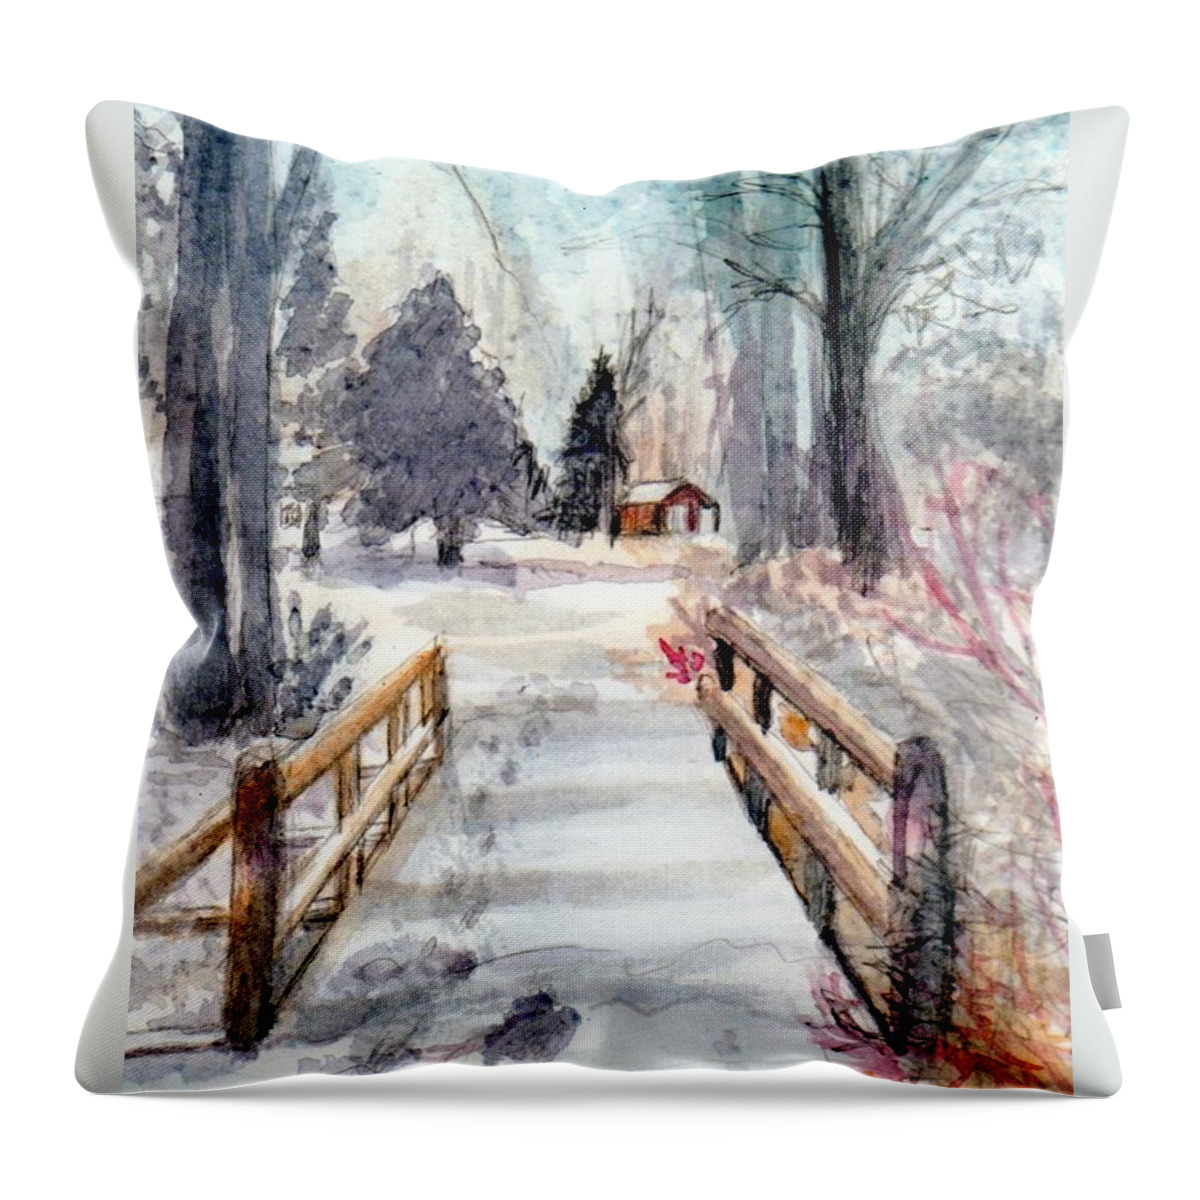 Watercolor Throw Pillow featuring the painting Winter Bridge by Deb Stroh-Larson